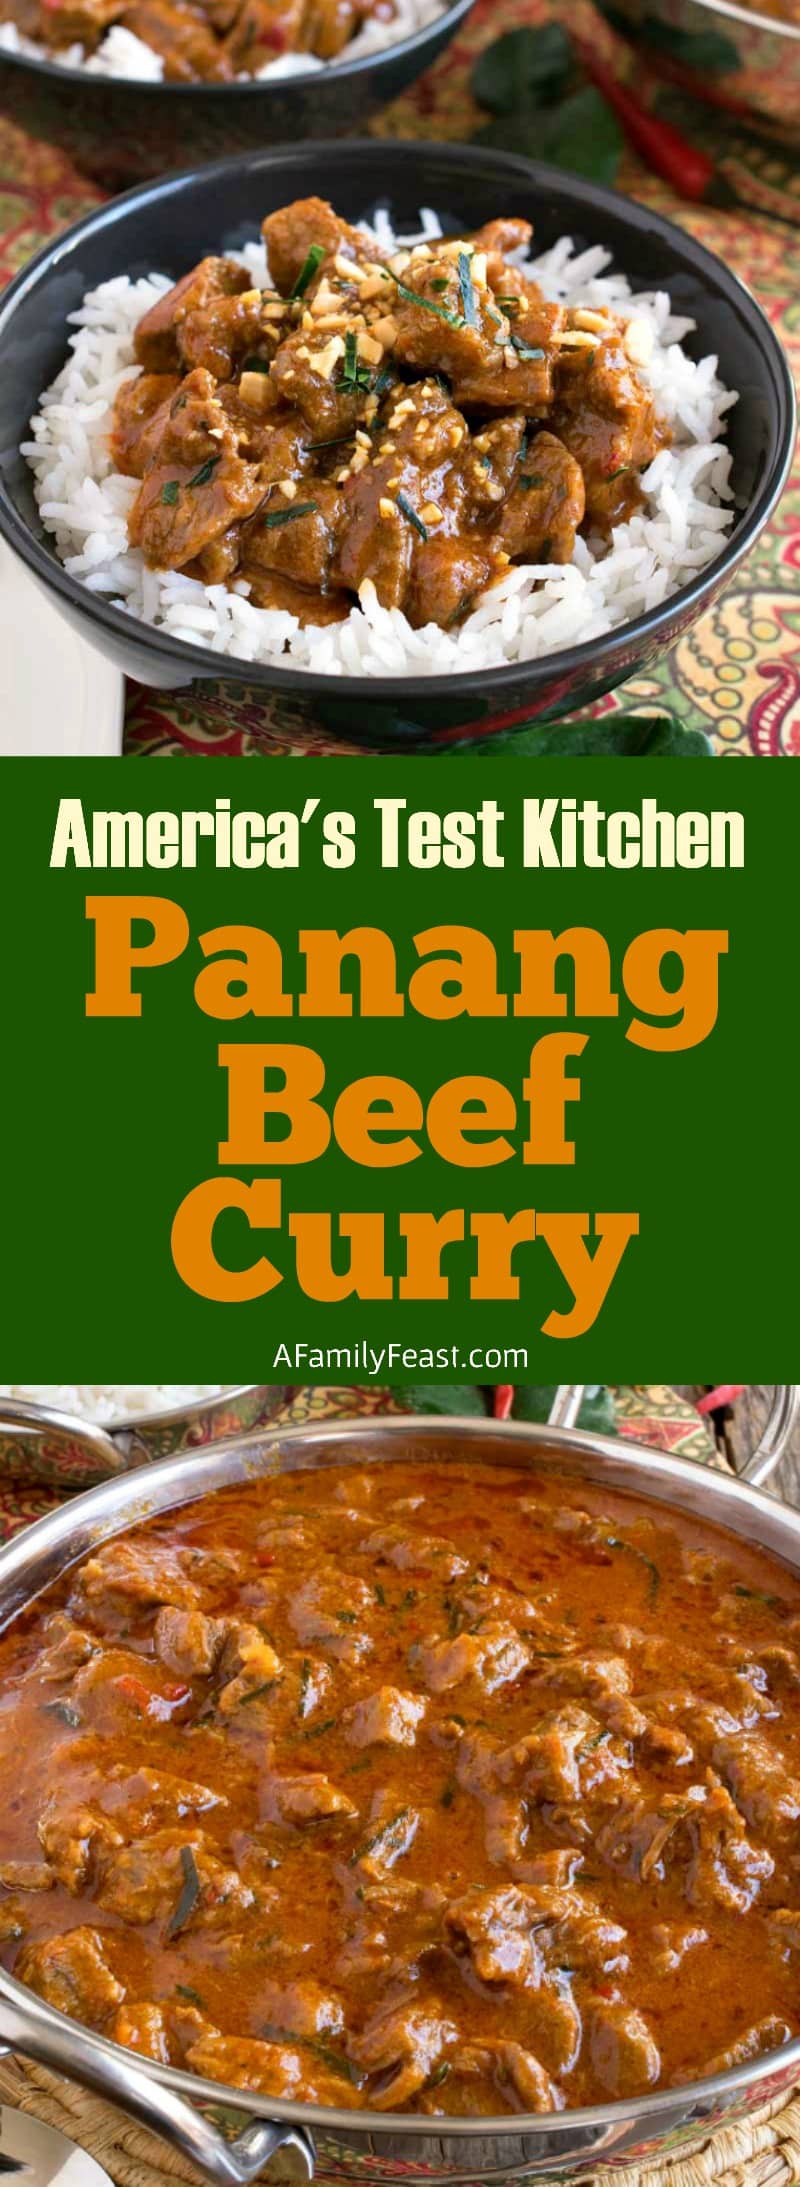 America's Test Kitchen Panang Beef Curry Recipe